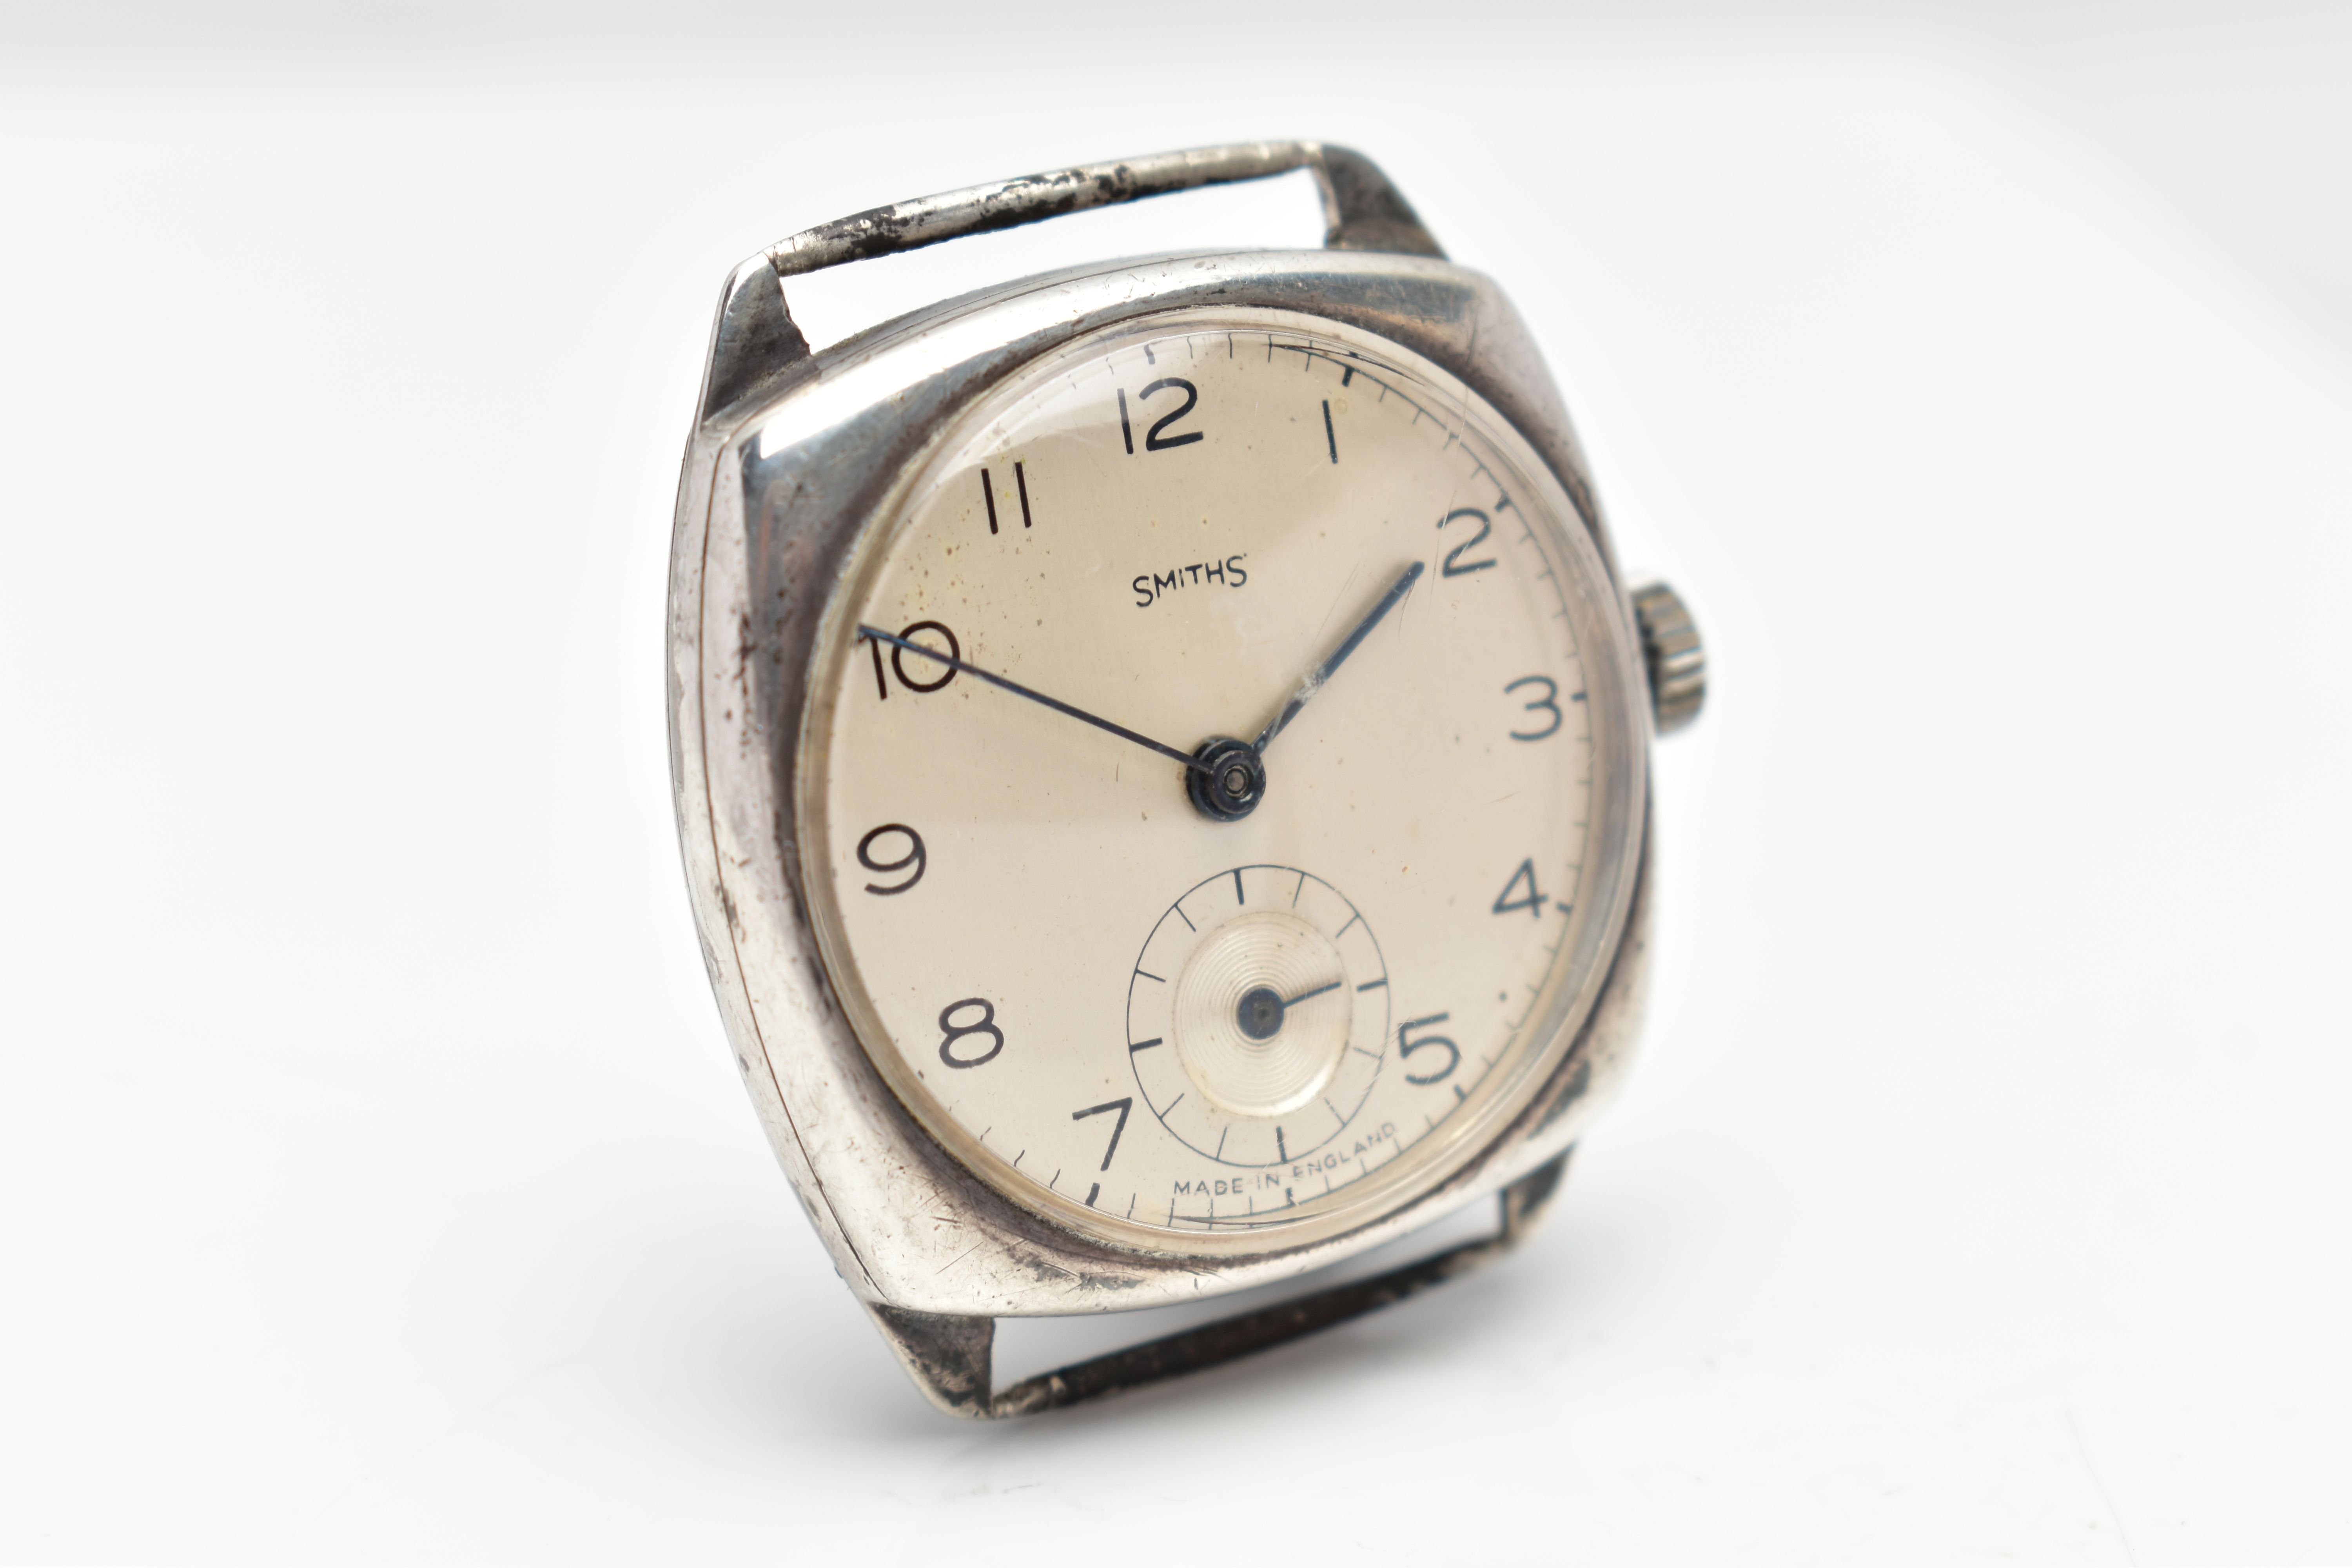 A WHITE METAL SMITHS WATCH HEAD, manual wind, cream colour dial, with Arabic hourly markers, - Image 6 of 6